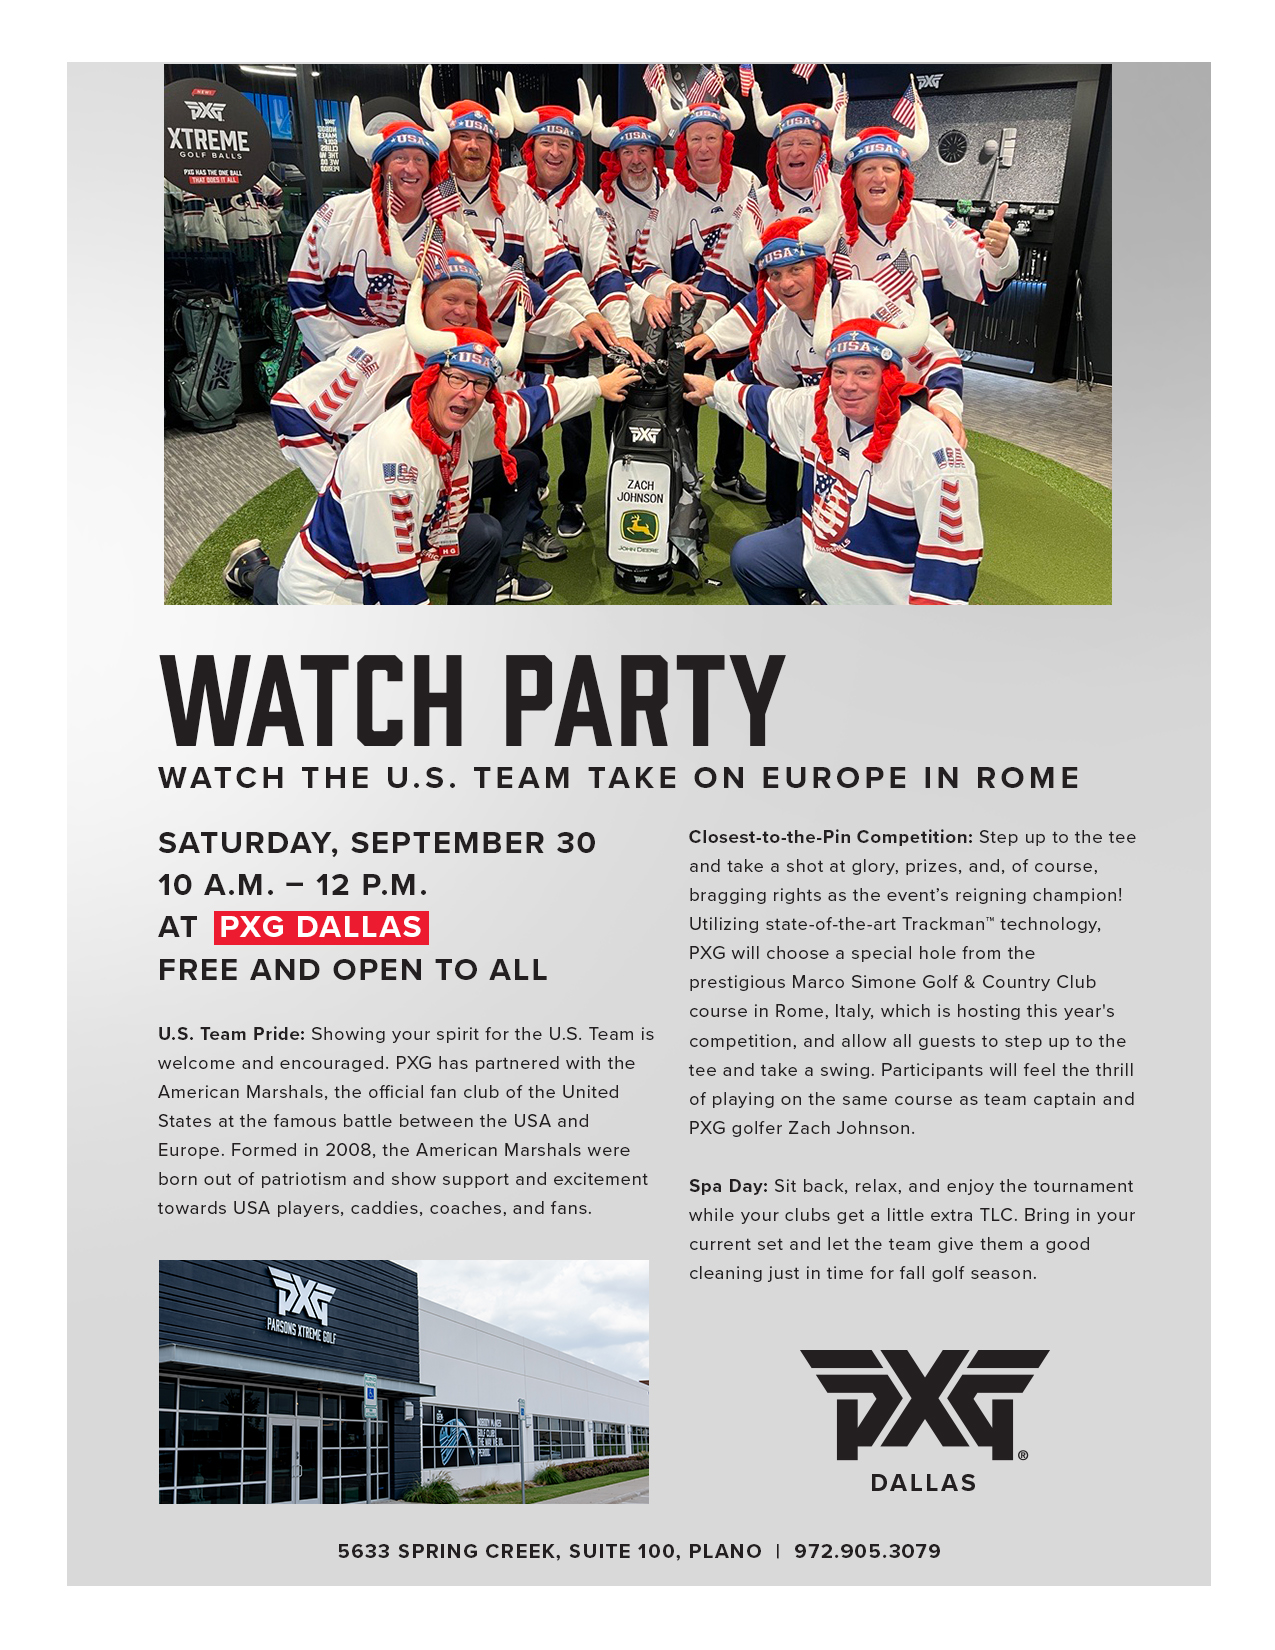 Ryder Cup Watch Party at PXG Dallas